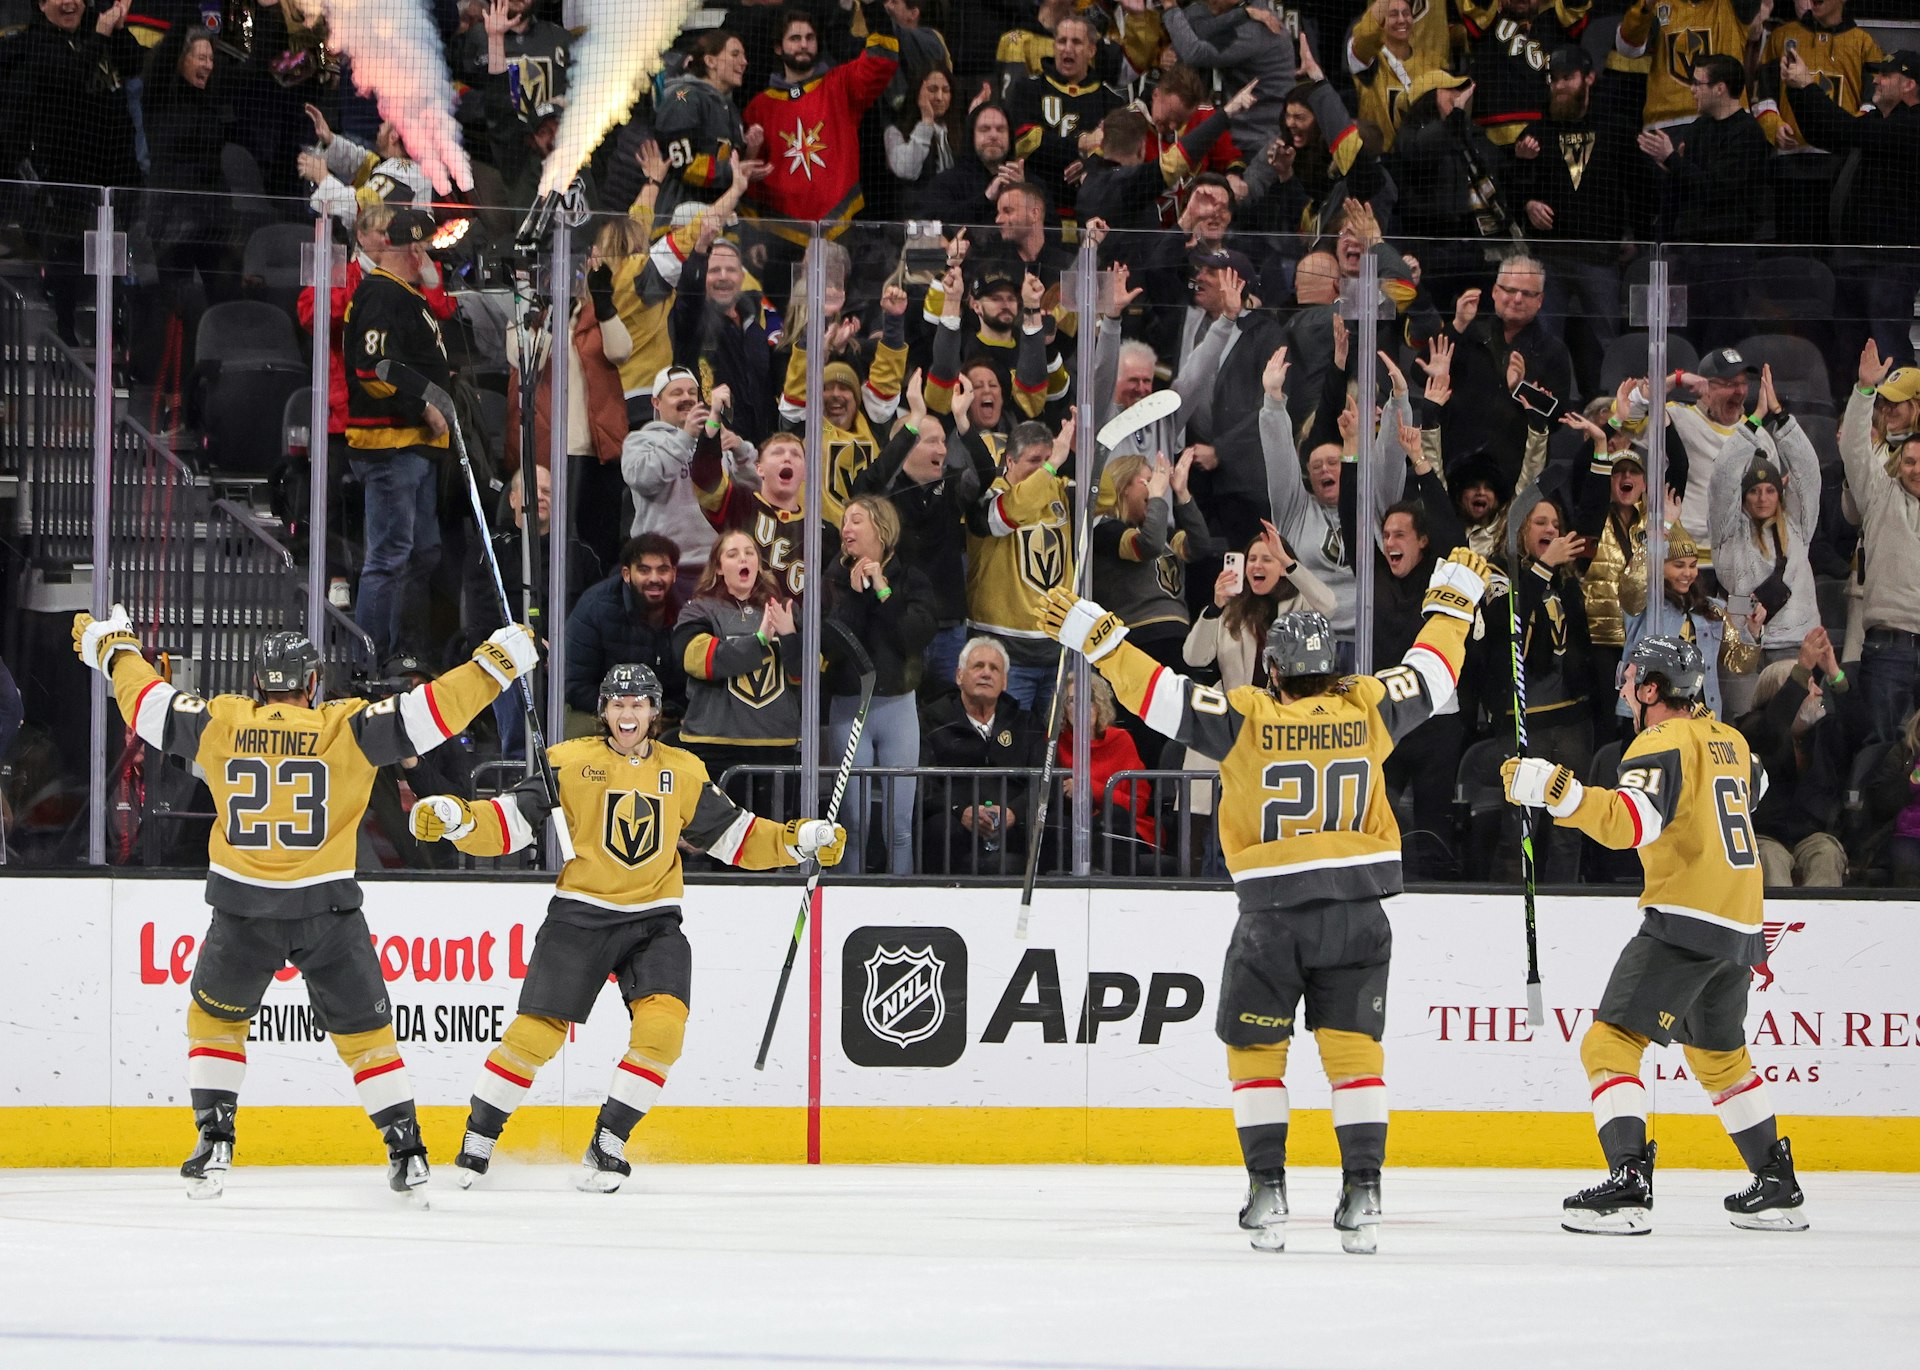 Las Vegas Golden Knights celebrate a win at the T-Mobile Arena